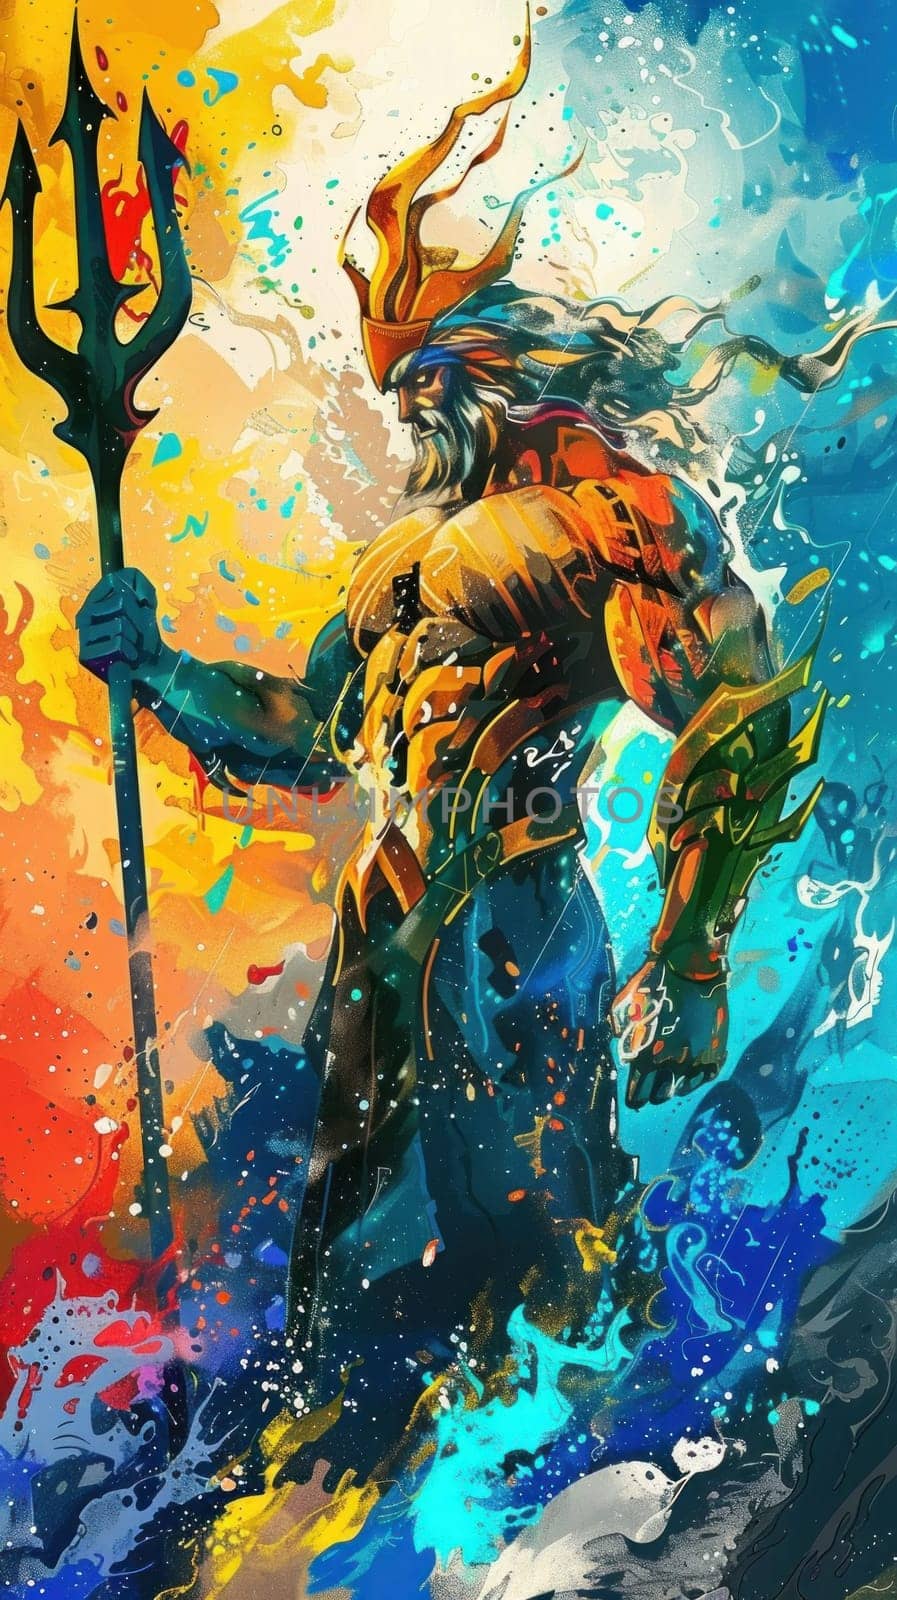 Poseidon with a trident is standing in a painting with a splash of color by golfmerrymaker